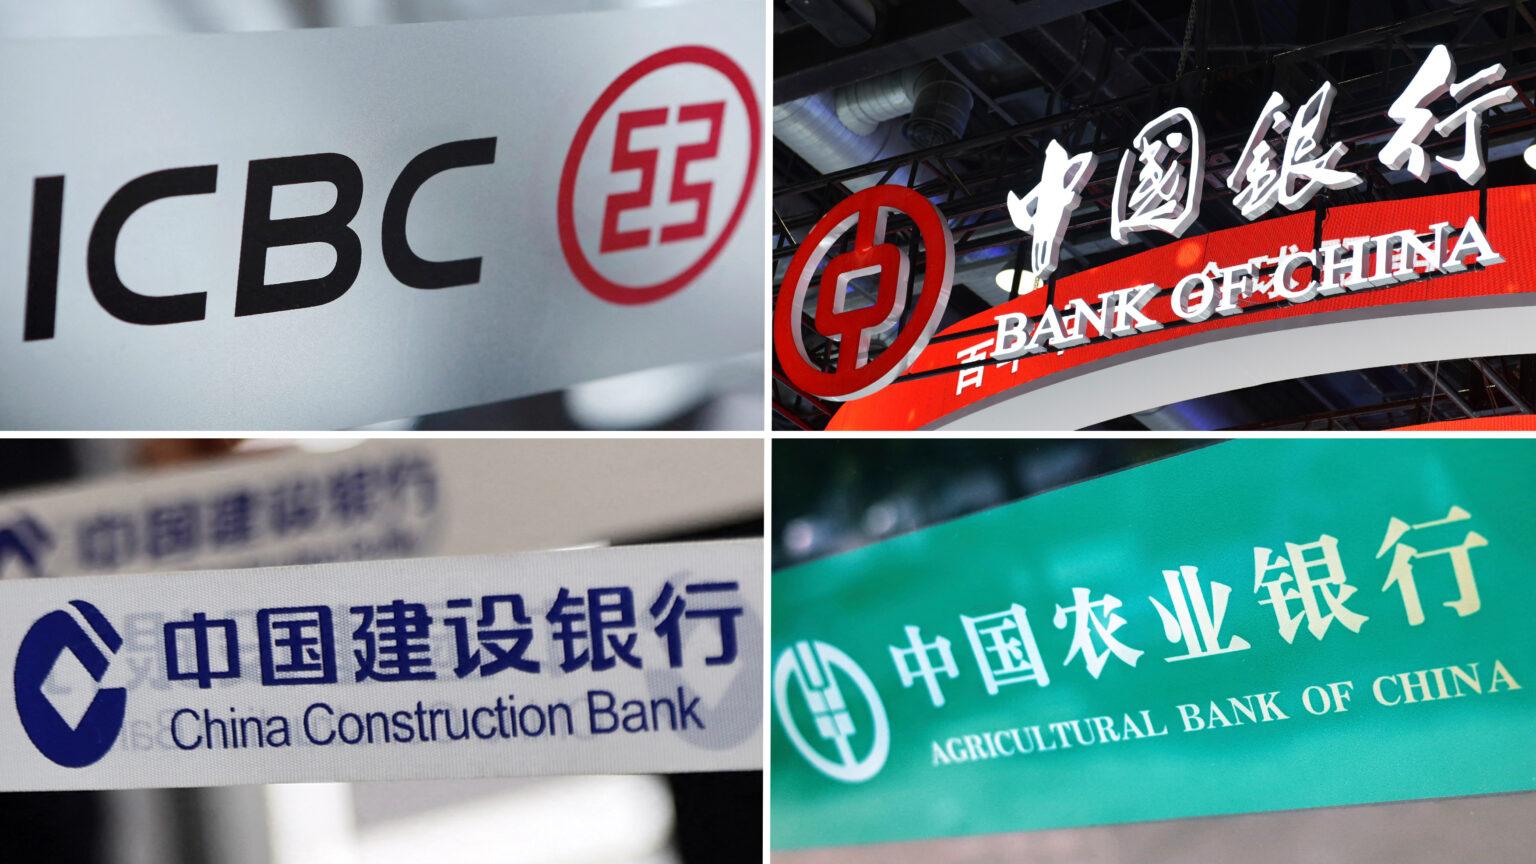 Banks in China